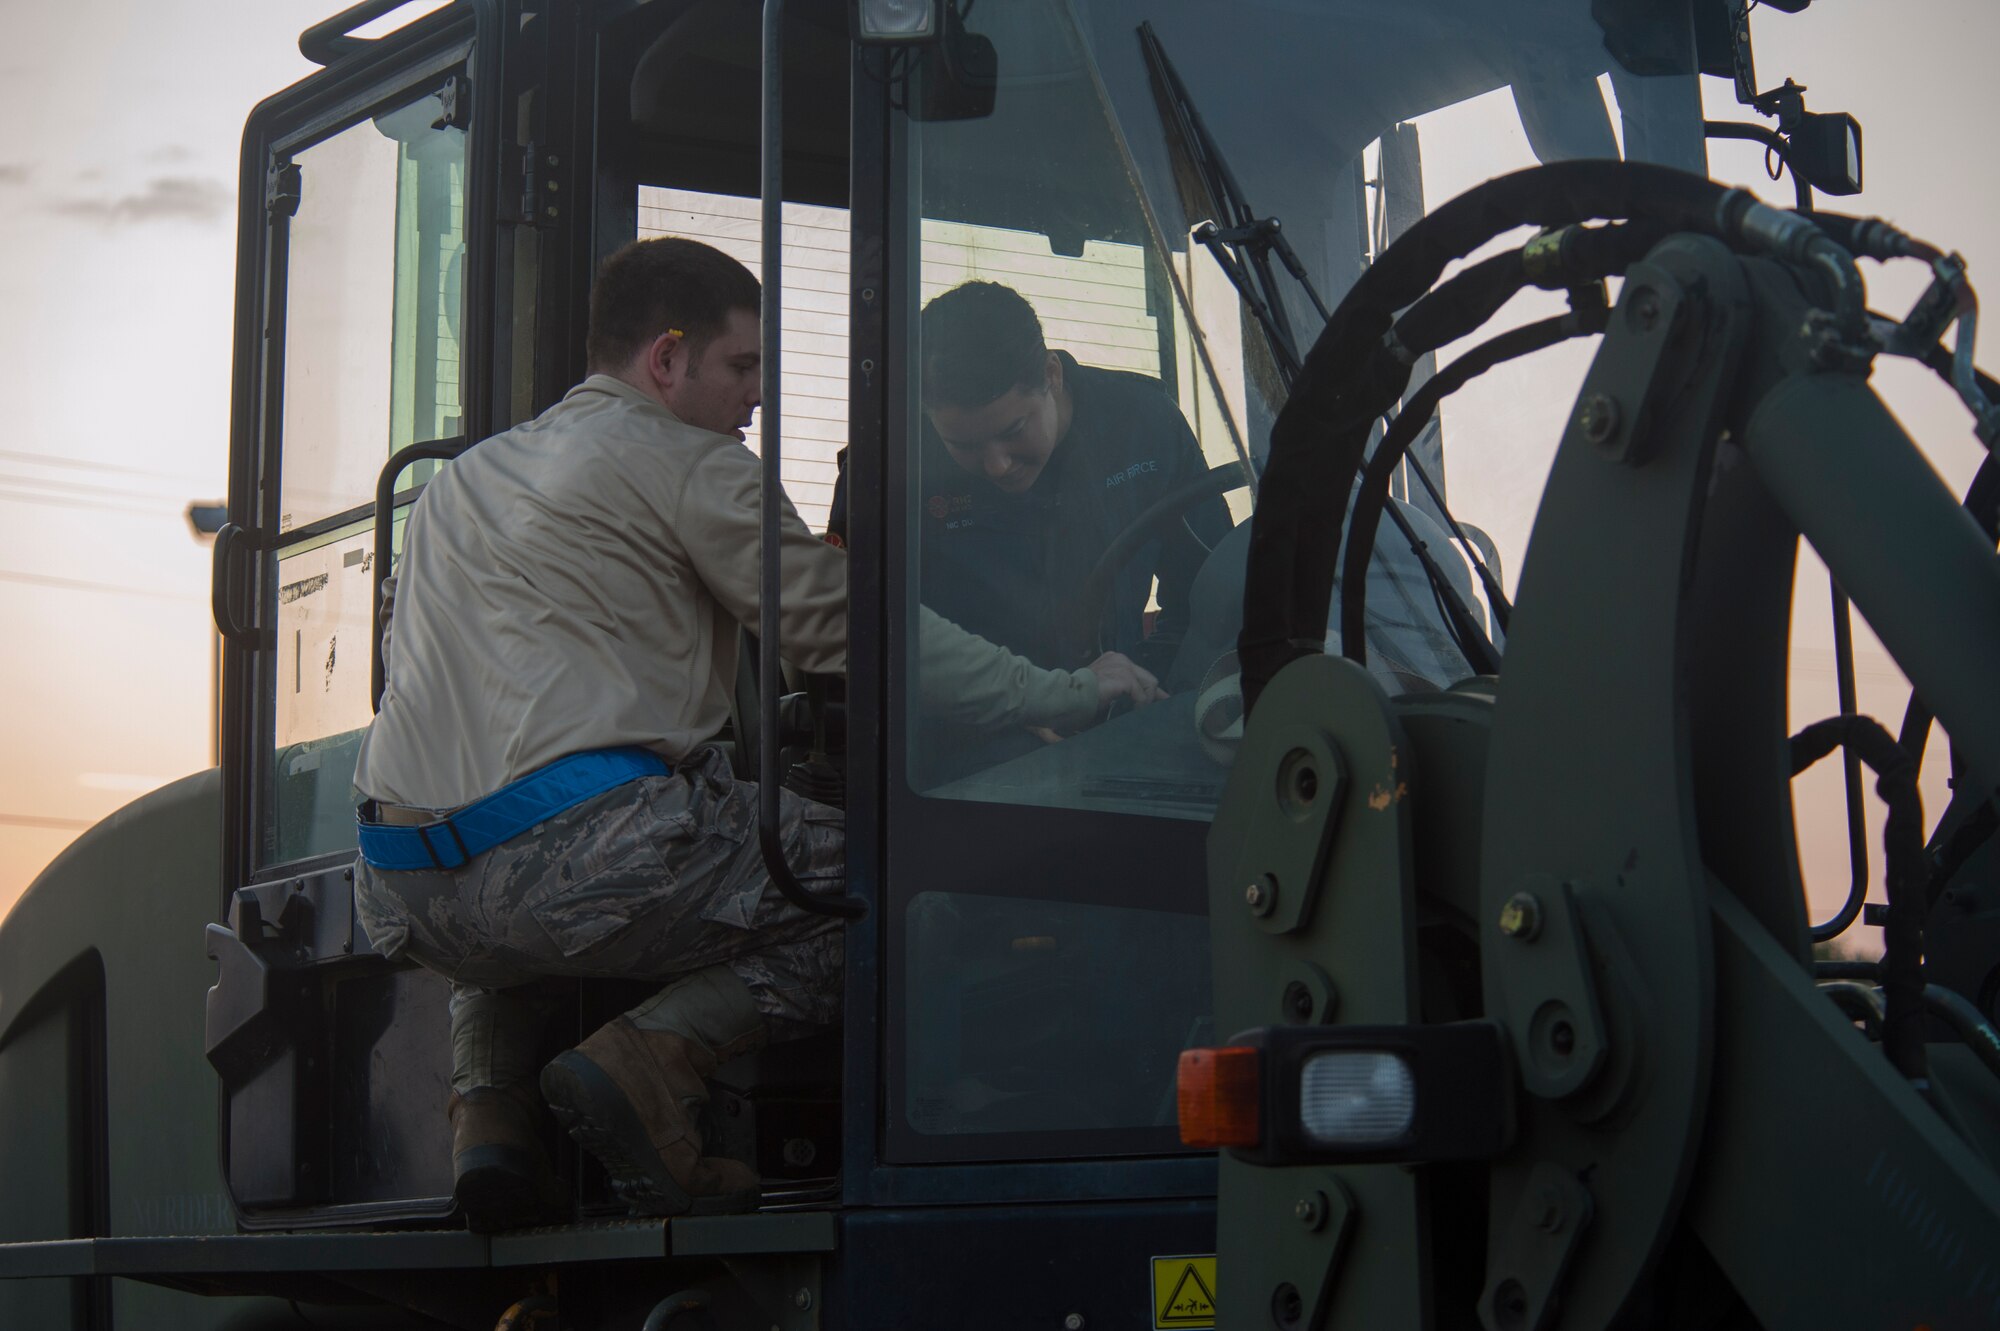 Senior Airman Bryant Lurty, 621st Contingency Response Squadron Aerial Port team member, shows Flight Lt. Nicola Durie, Royal New Zealand air force air movements, the controls to a forklift during a Joint Readiness Training exercise at Alexandria International Airport, LA. April 17, 2016. JRTC is a multinational exercise focused on pre-deployment and airdrop capabilities. (U.S. Air Force photo by Senior Airman Joshua King)